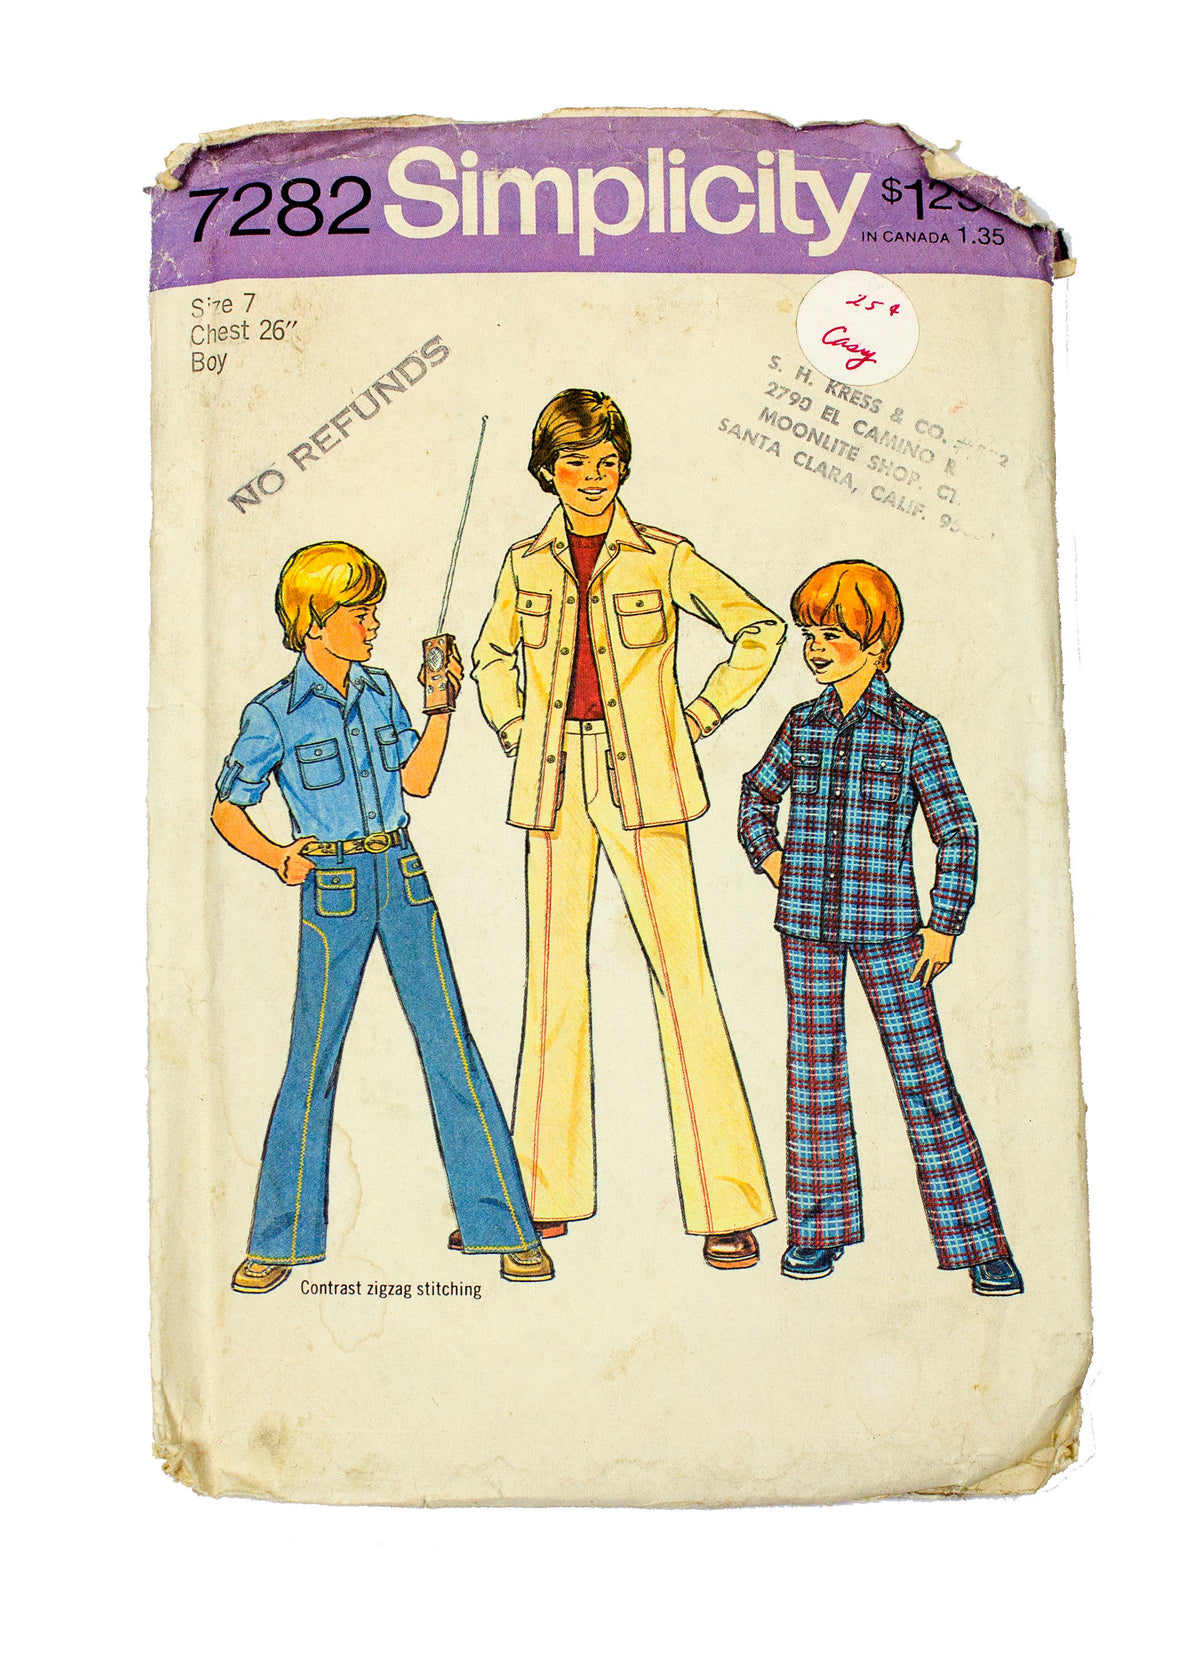 Simplicity 7282 Boys Shirt and Pants - Size 7 Chest 26